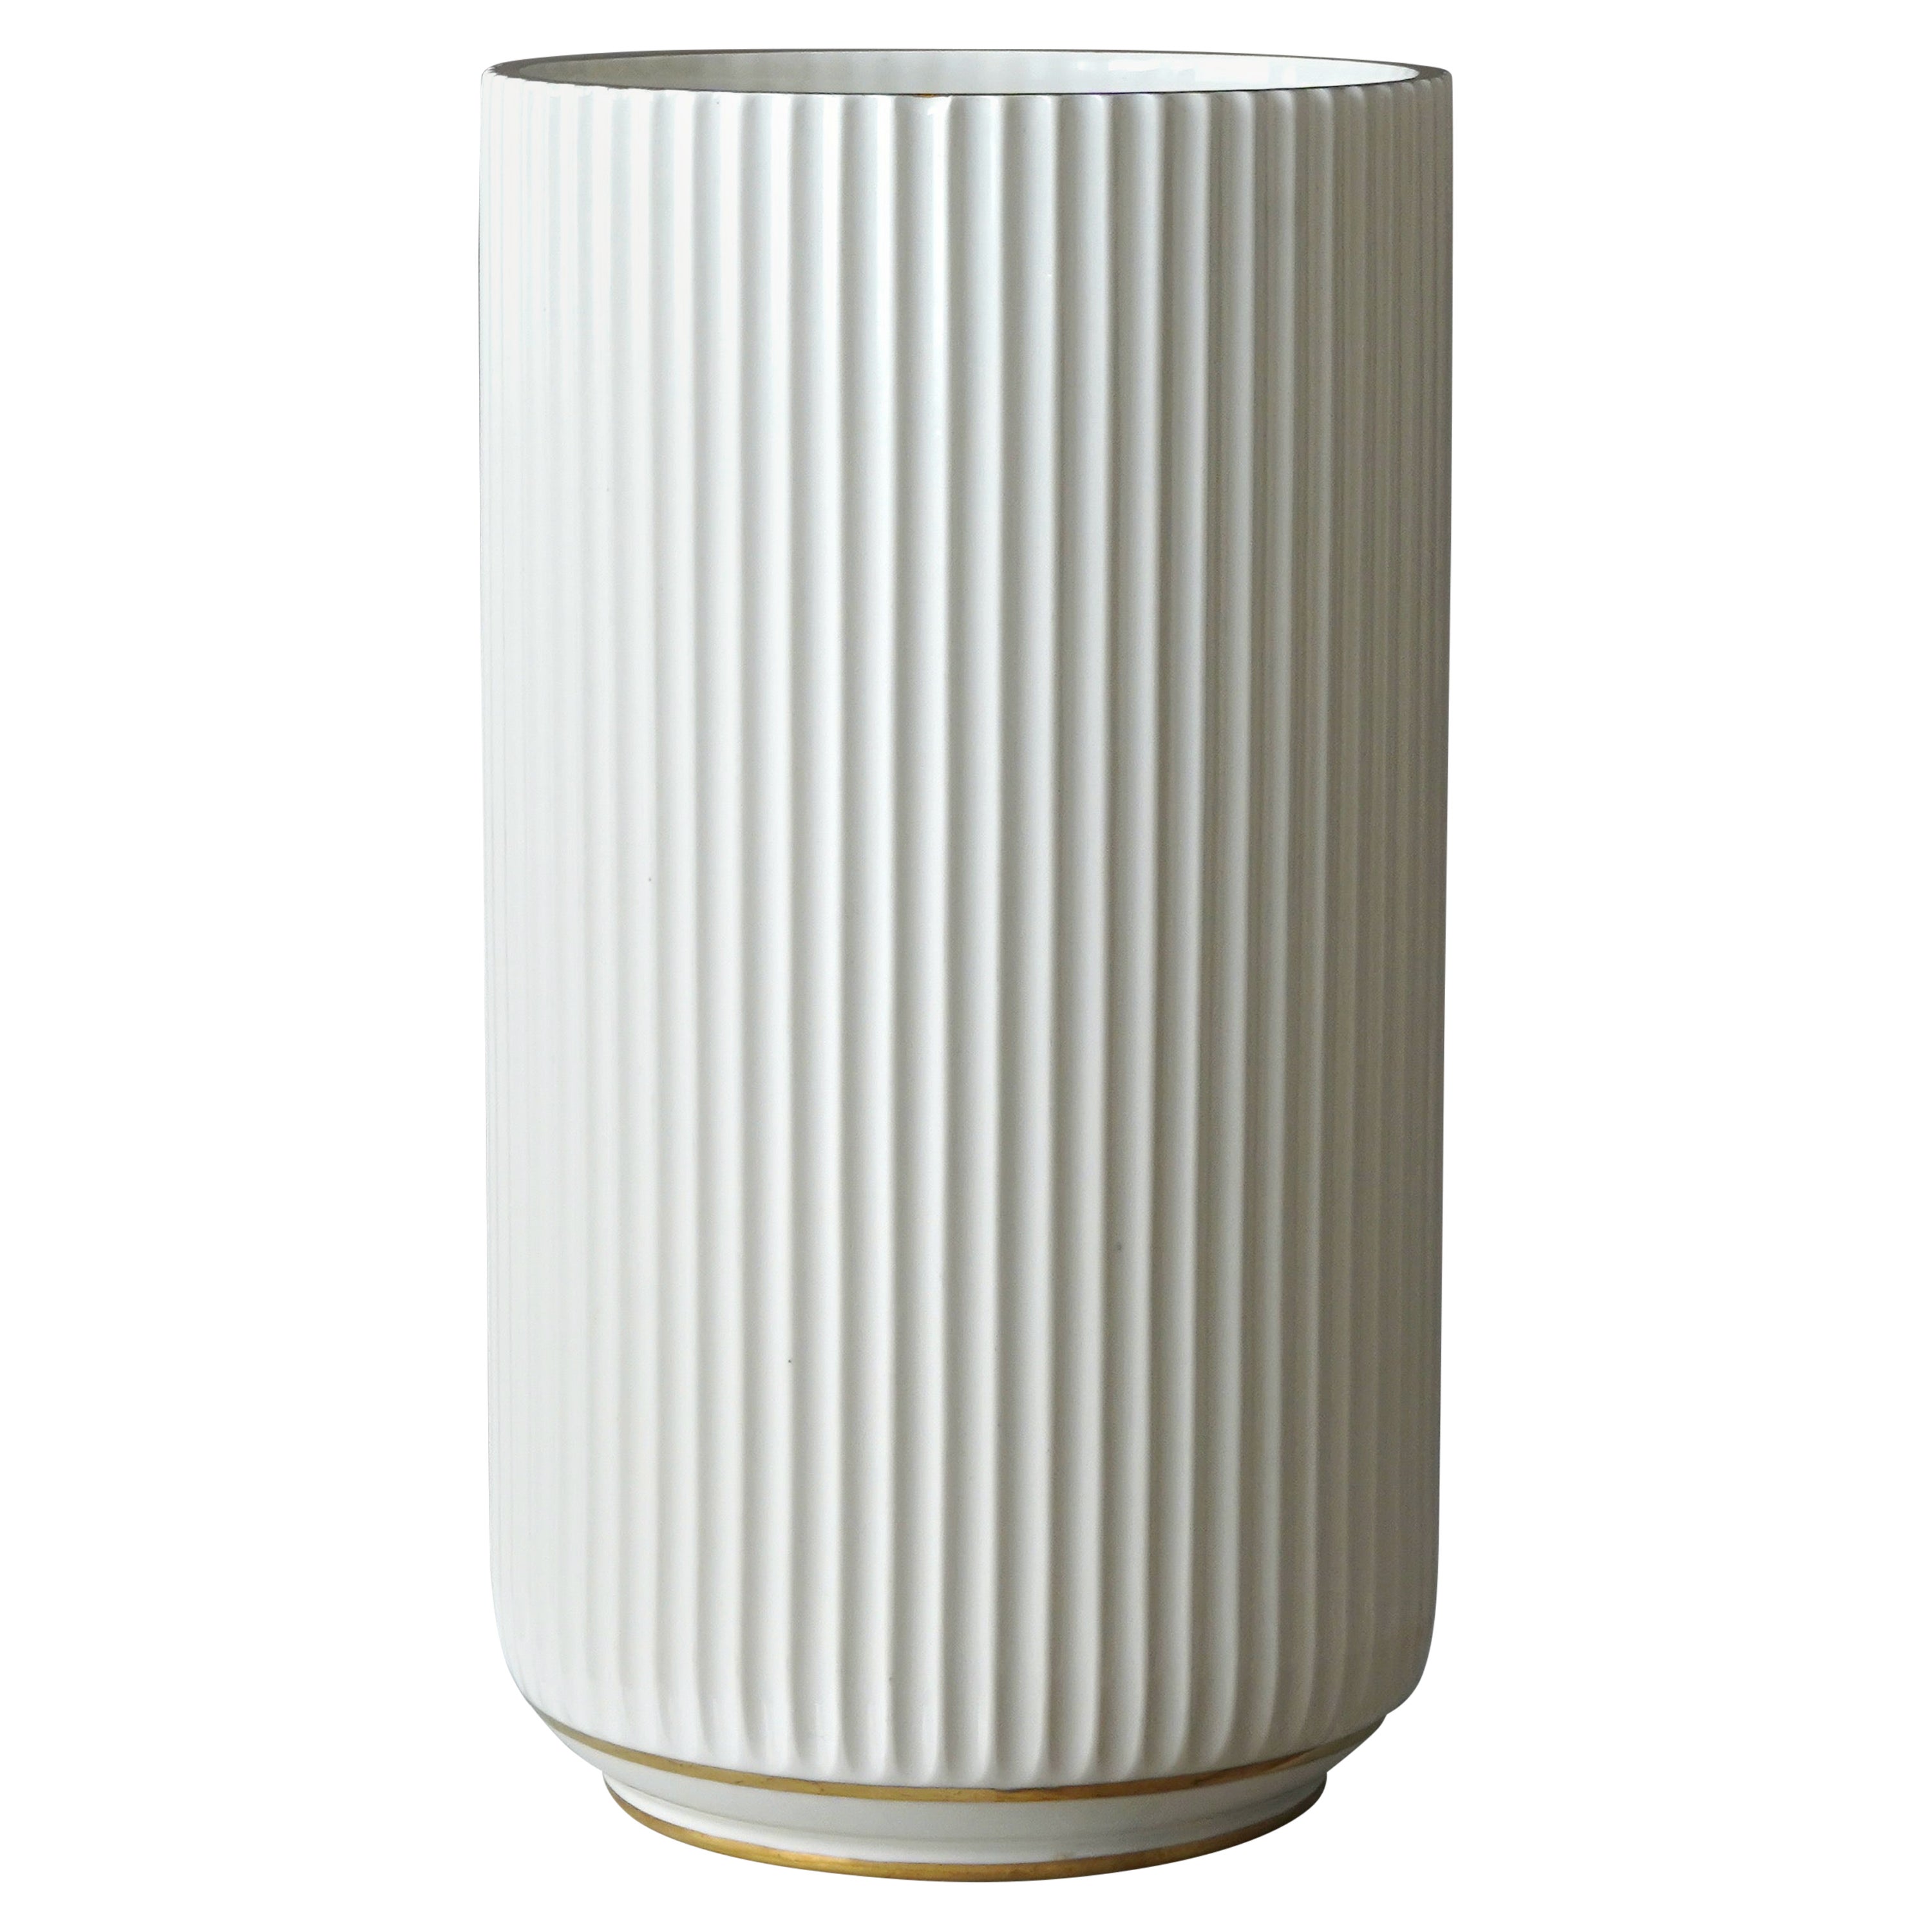 Early and Largest Lyngby Porcelain Vase with Gold Decoration, 1936-1940, Denmark